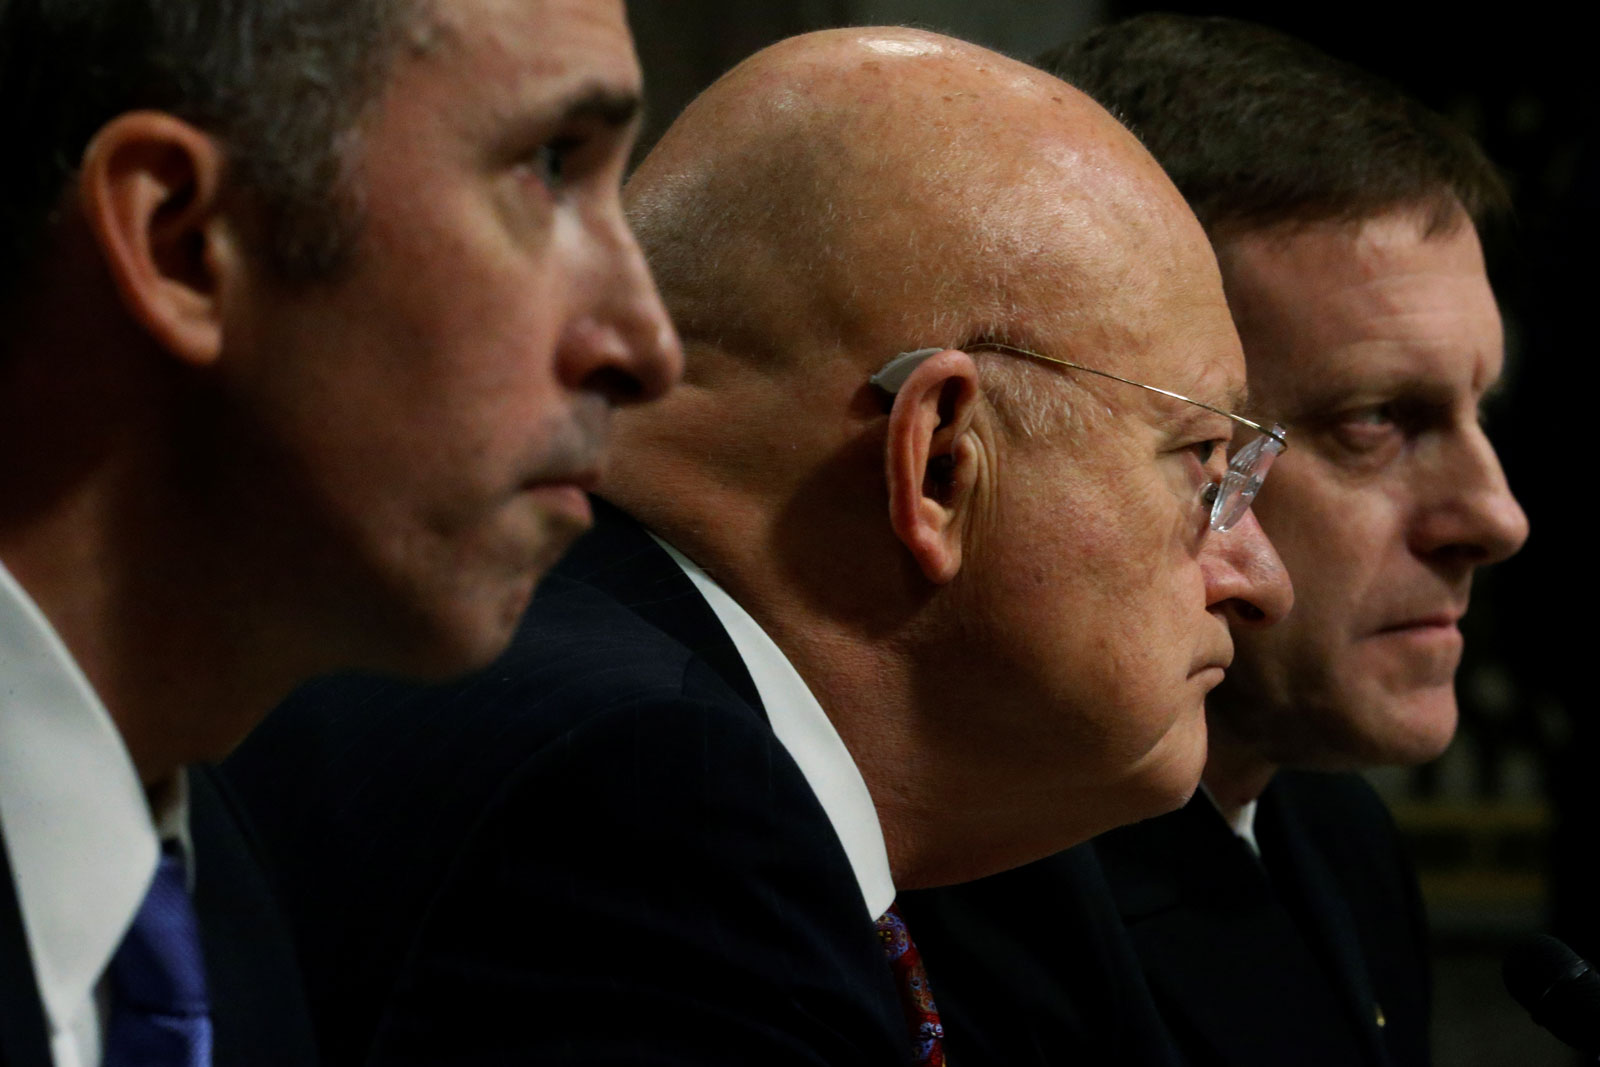 US Defense Under Secretary for Intelligence Marcel Lettre, Director of National Intelligence James Clapper, and National Security Agency Director Michael Rogers testifying before a Senate Armed Services Committee hearing on foreign cyber threats, Washington, DC, January 5, 2017